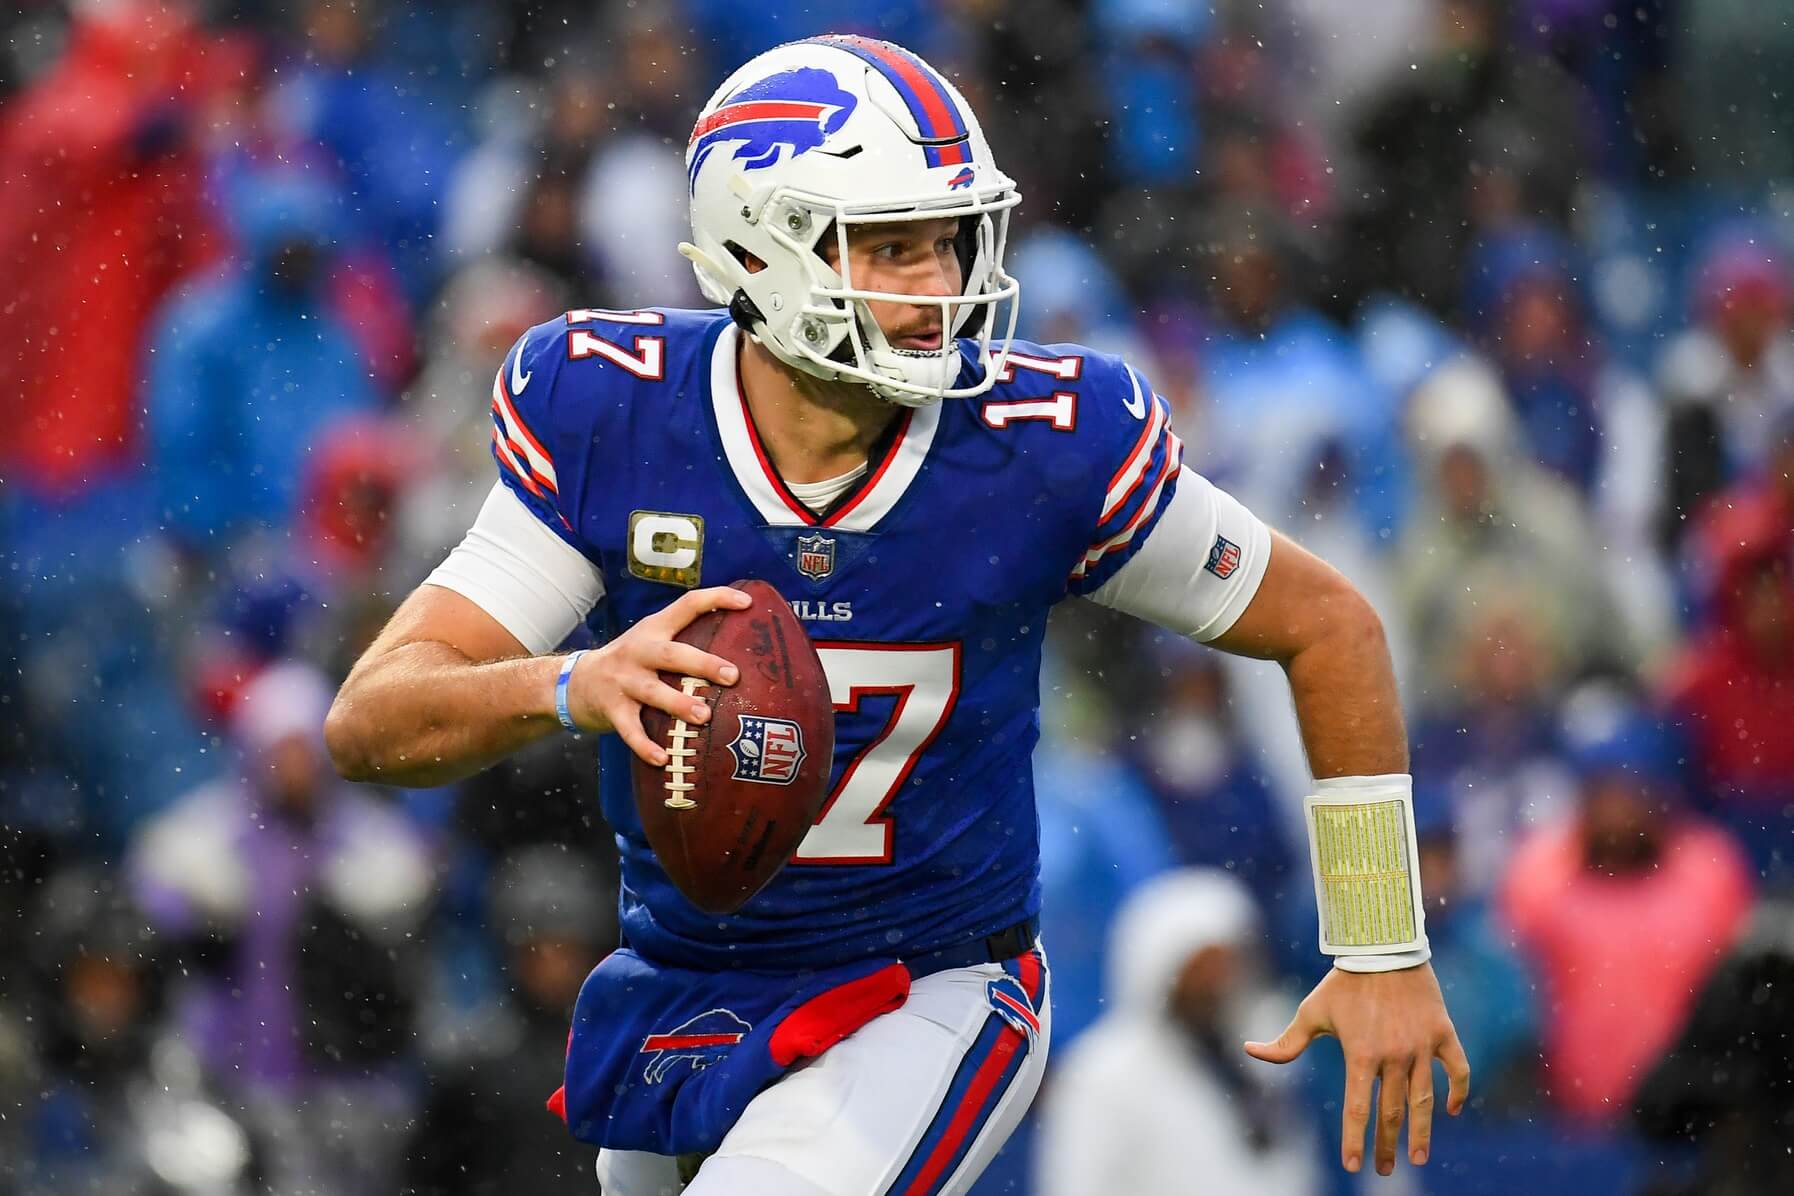 Buffalo Bills quarterback Josh Allen (17) runs with the ball against the Indianapolis Colts during the second half at Highmark Stadium.